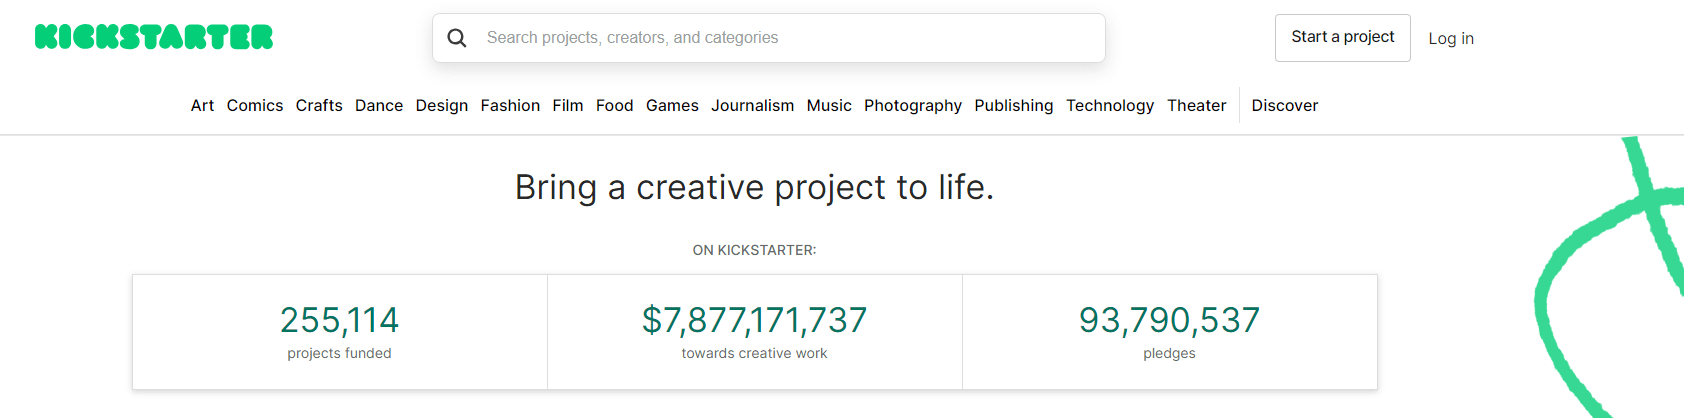 Screenshot of the Kickstarter homepage, a crowdfunding website for individuals and nonprofits